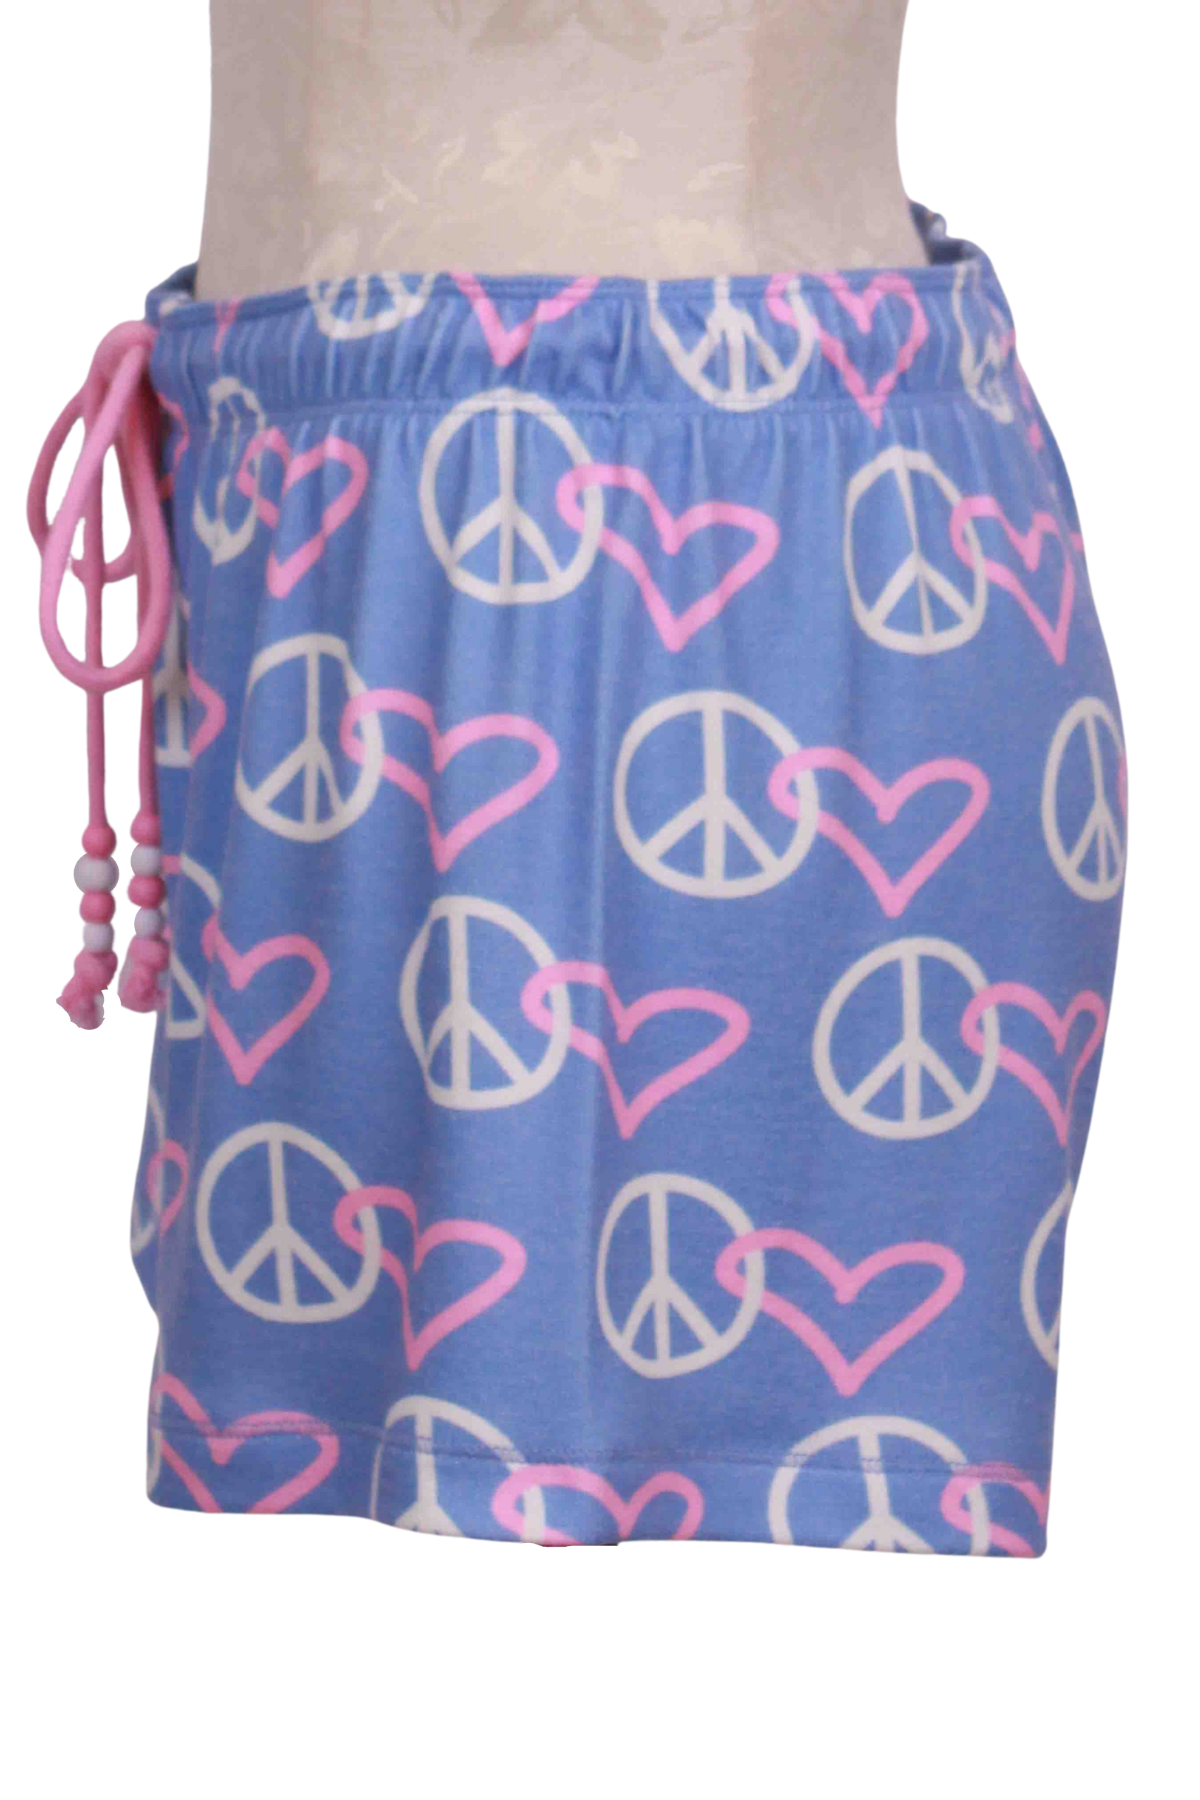 side view of Peace Love Shorts by PJ Salvage